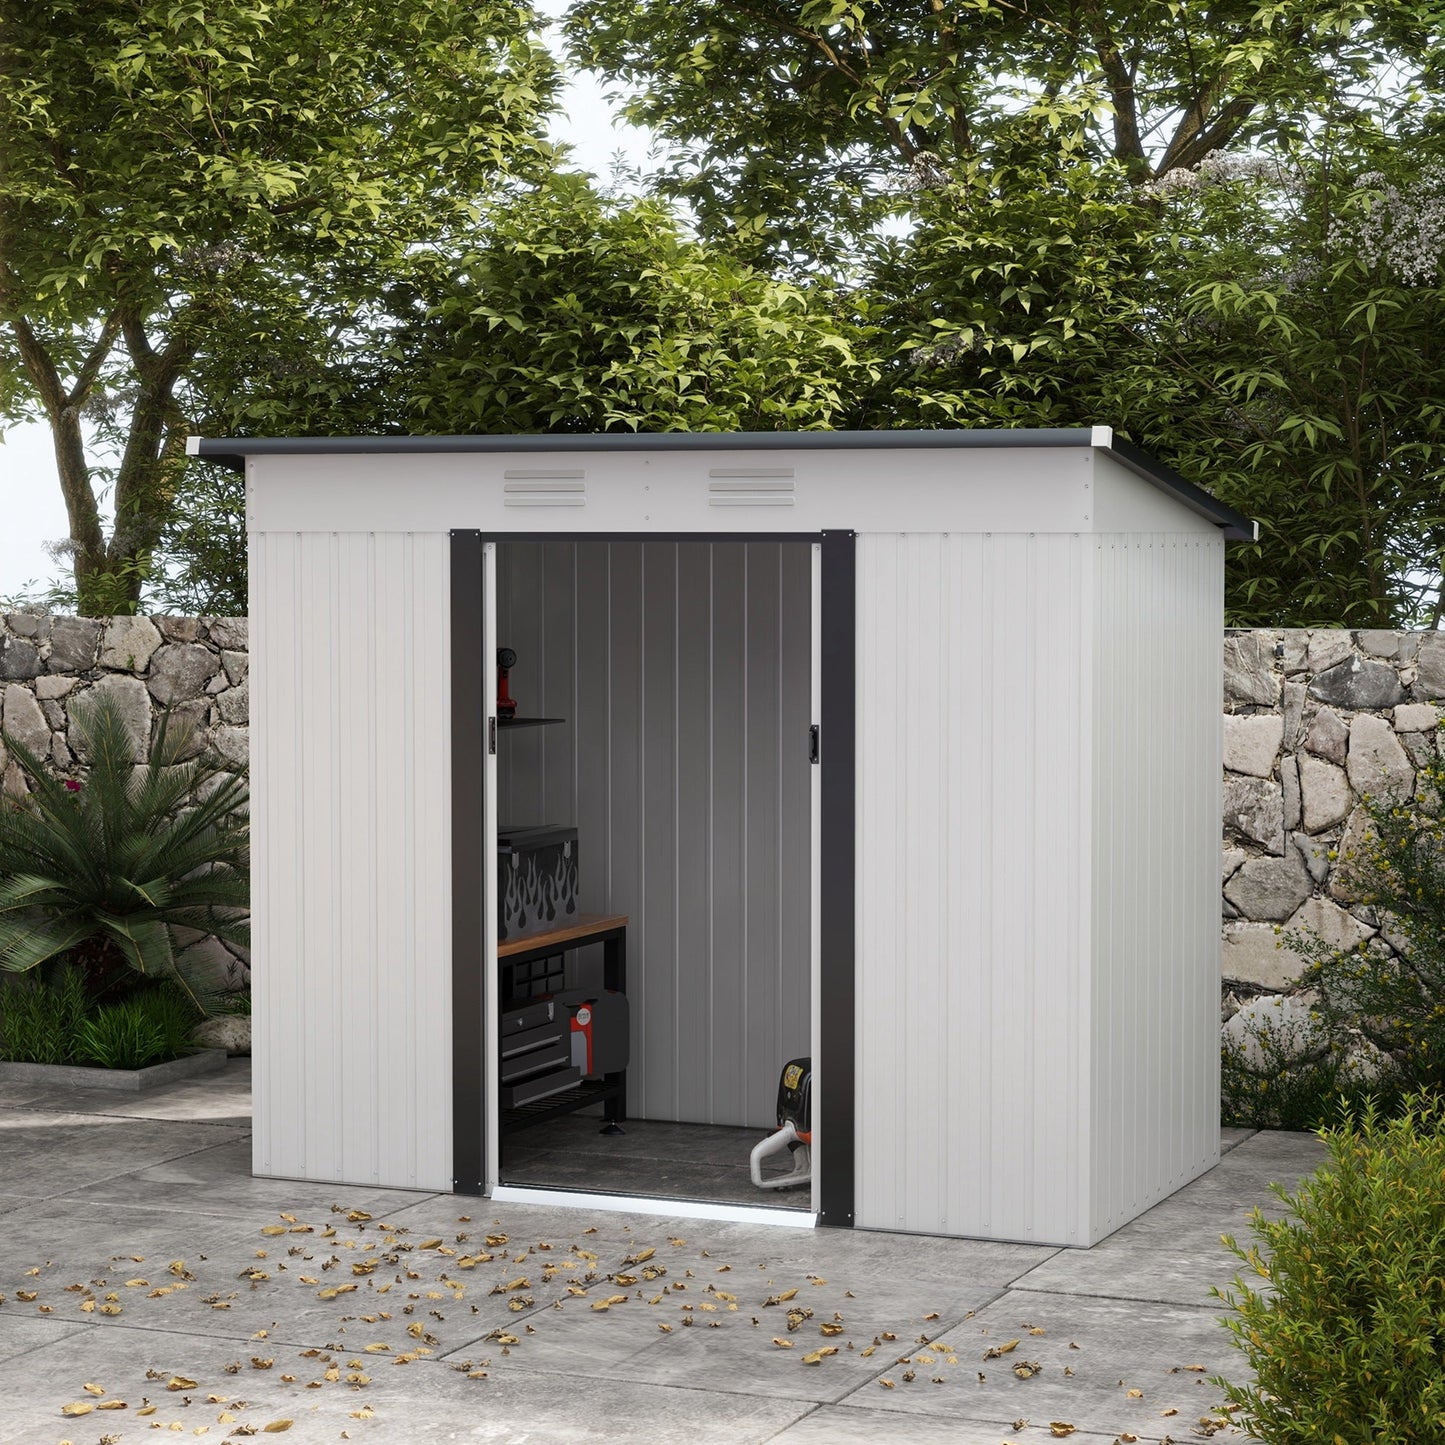 -Outsunny 8' x 4' Metal Garden Shed, Backyard Tool Storage Shed with Dual Locking Doors, 2 Air Vents and Steel Frame, White - Outdoor Style Company